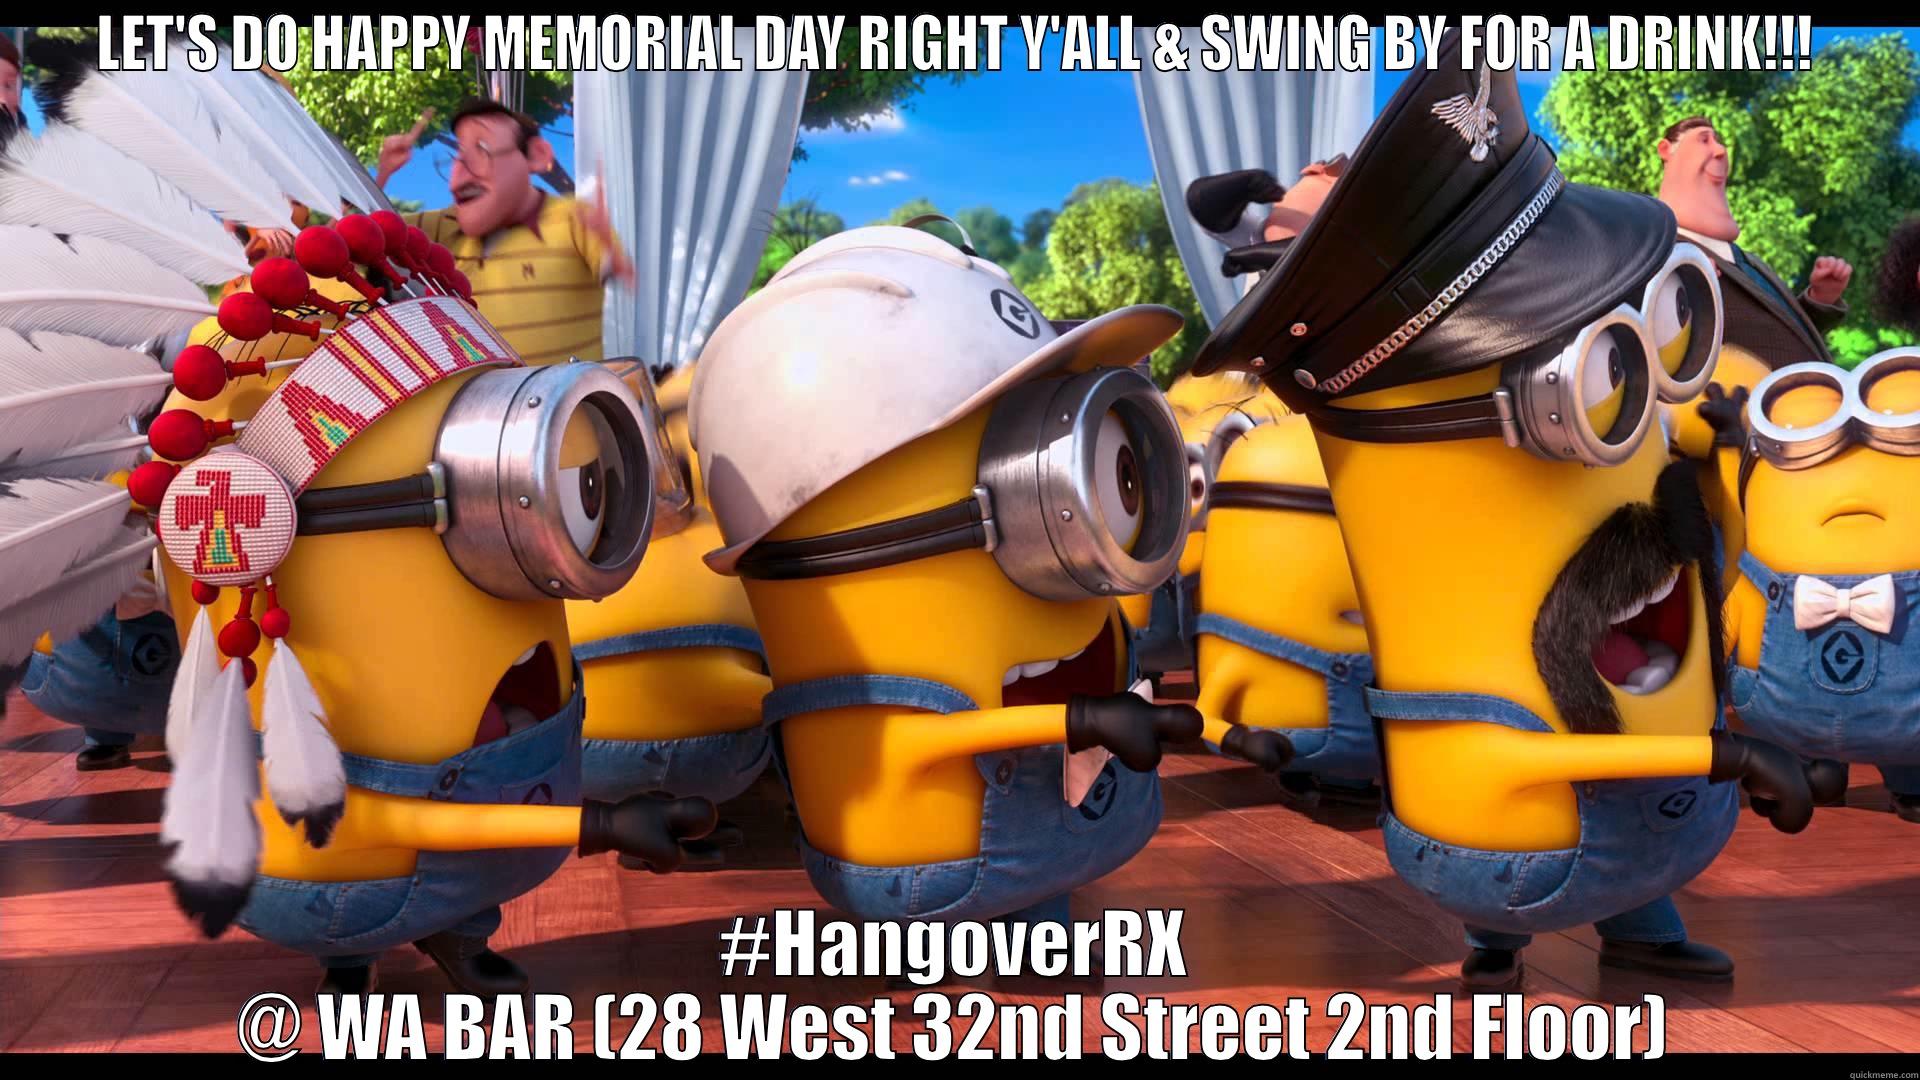 MEMORIAL DAY DRINKS - LET'S DO HAPPY MEMORIAL DAY RIGHT Y'ALL & SWING BY FOR A DRINK!!! #HANGOVERRX @ WA BAR (28 WEST 32ND STREET 2ND FLOOR) Misc